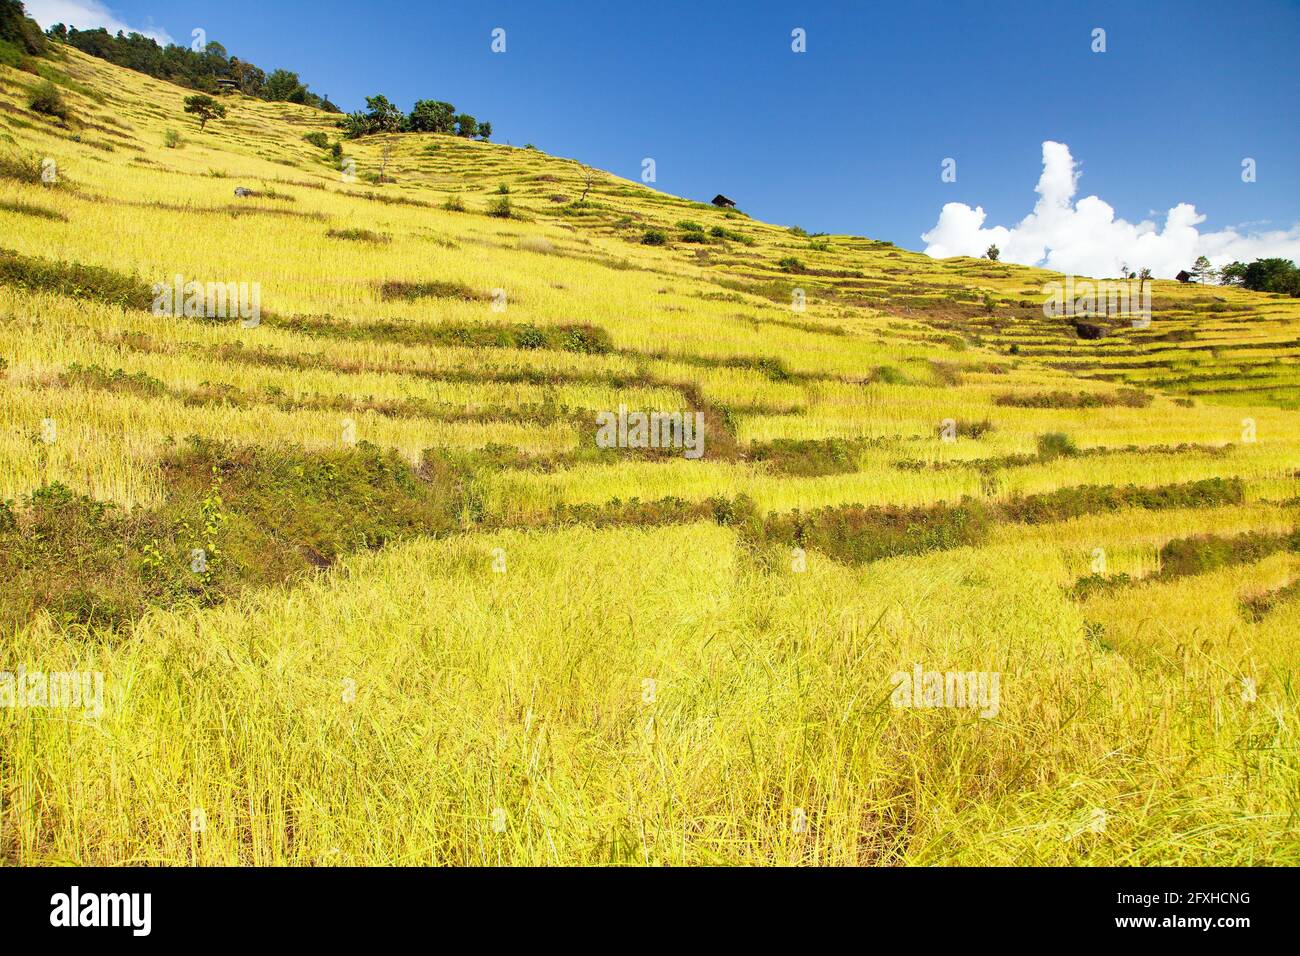 golden terraced rice or paddy field in Nepal Himalayas mountains beautiful himalayan landscape Stock Photo